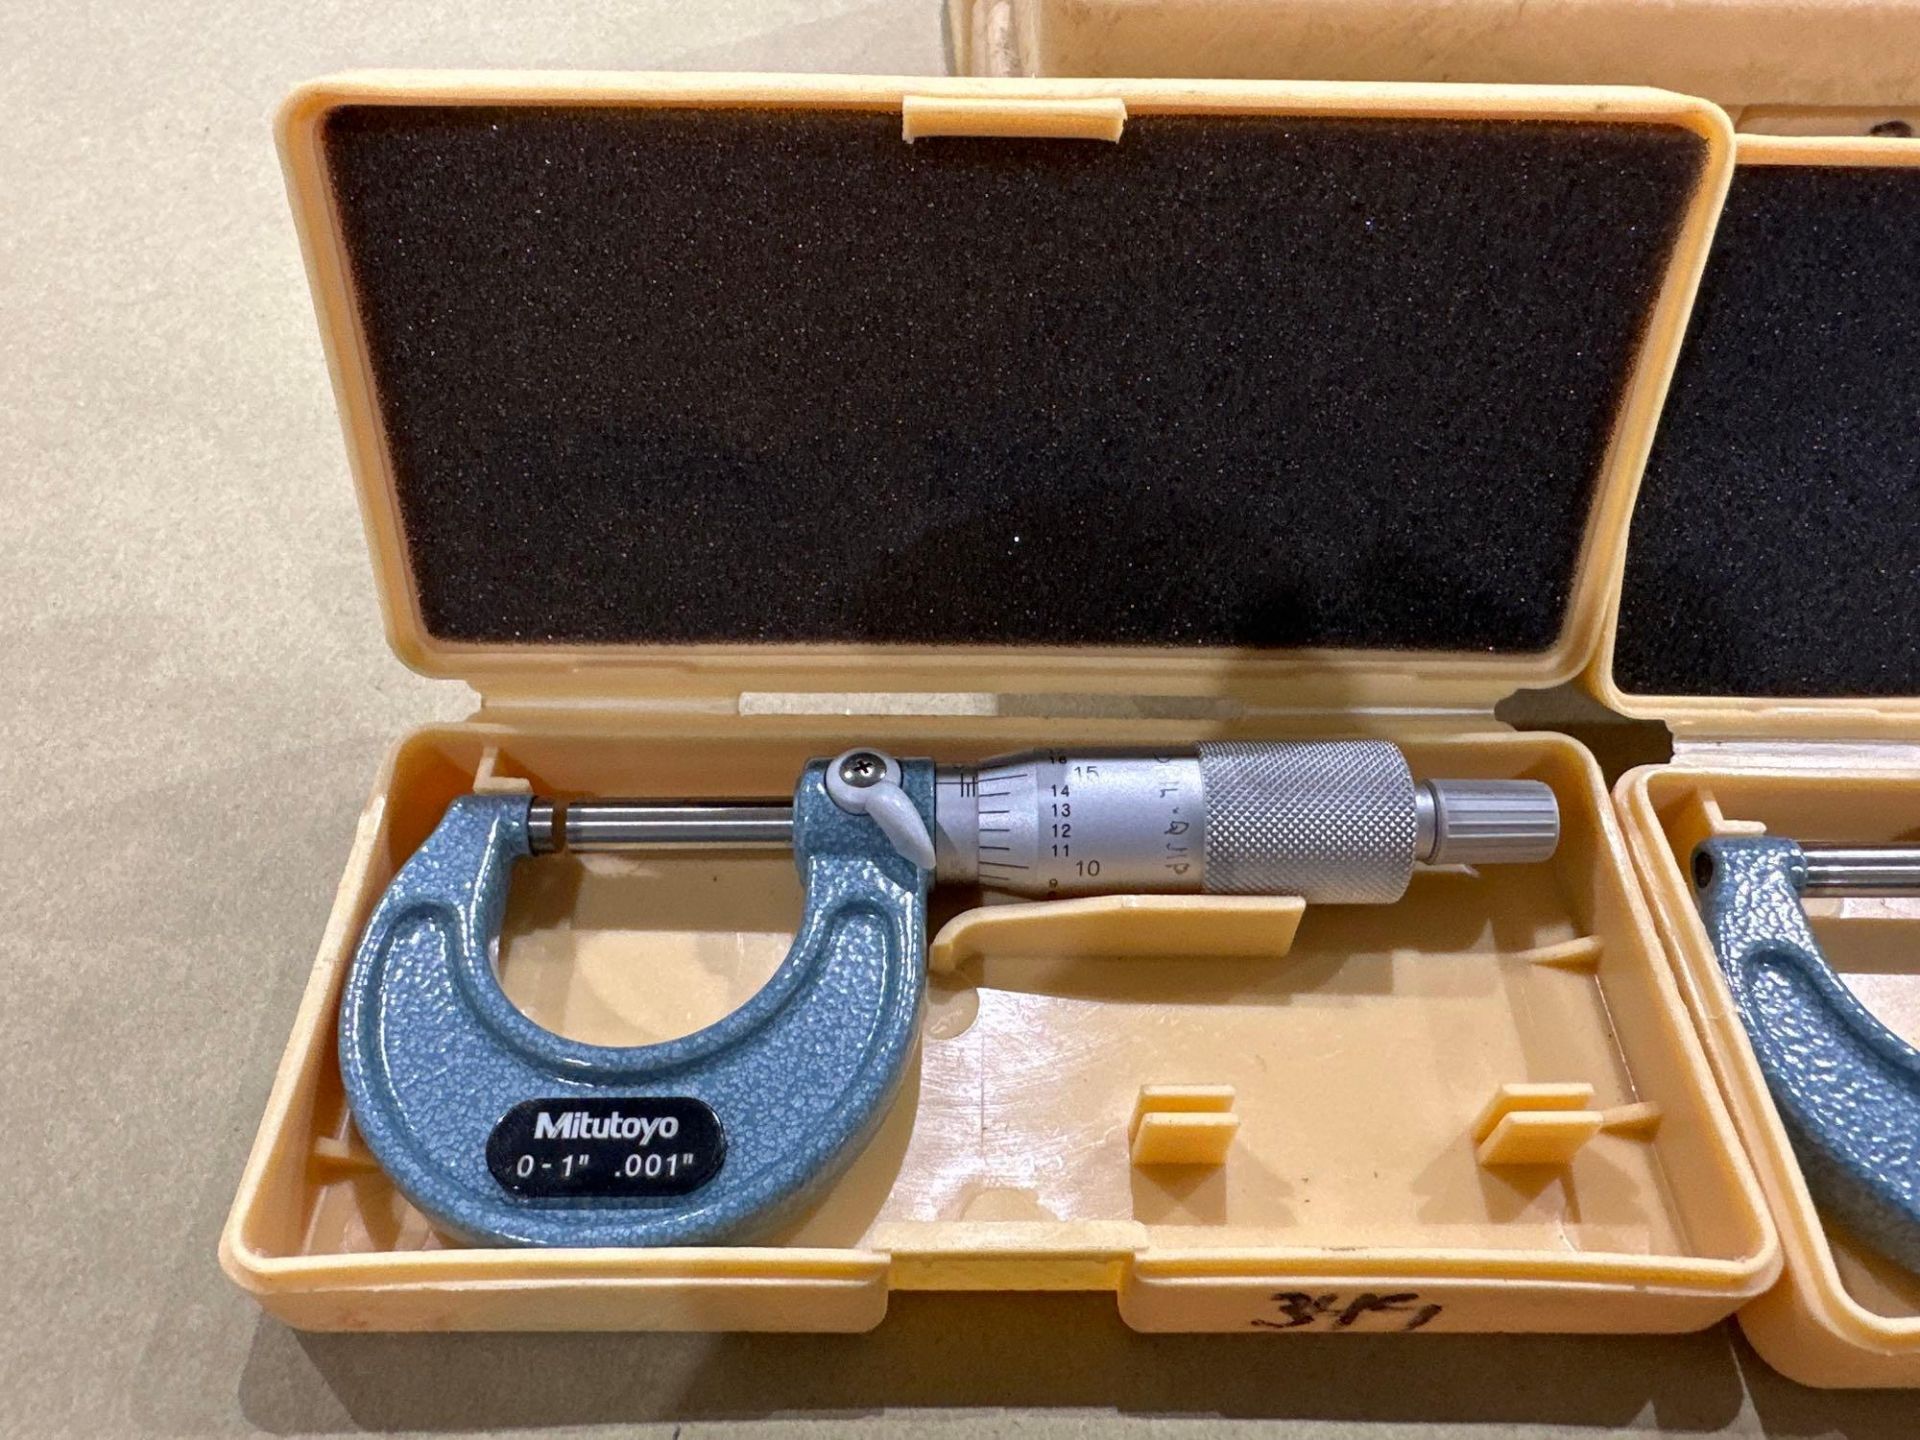 Lot of 12: Mitutoyo Mechanical OD Micrometer M110-1”, 0-1” Range, .001” Graduation, in plastic boxes - Image 6 of 7